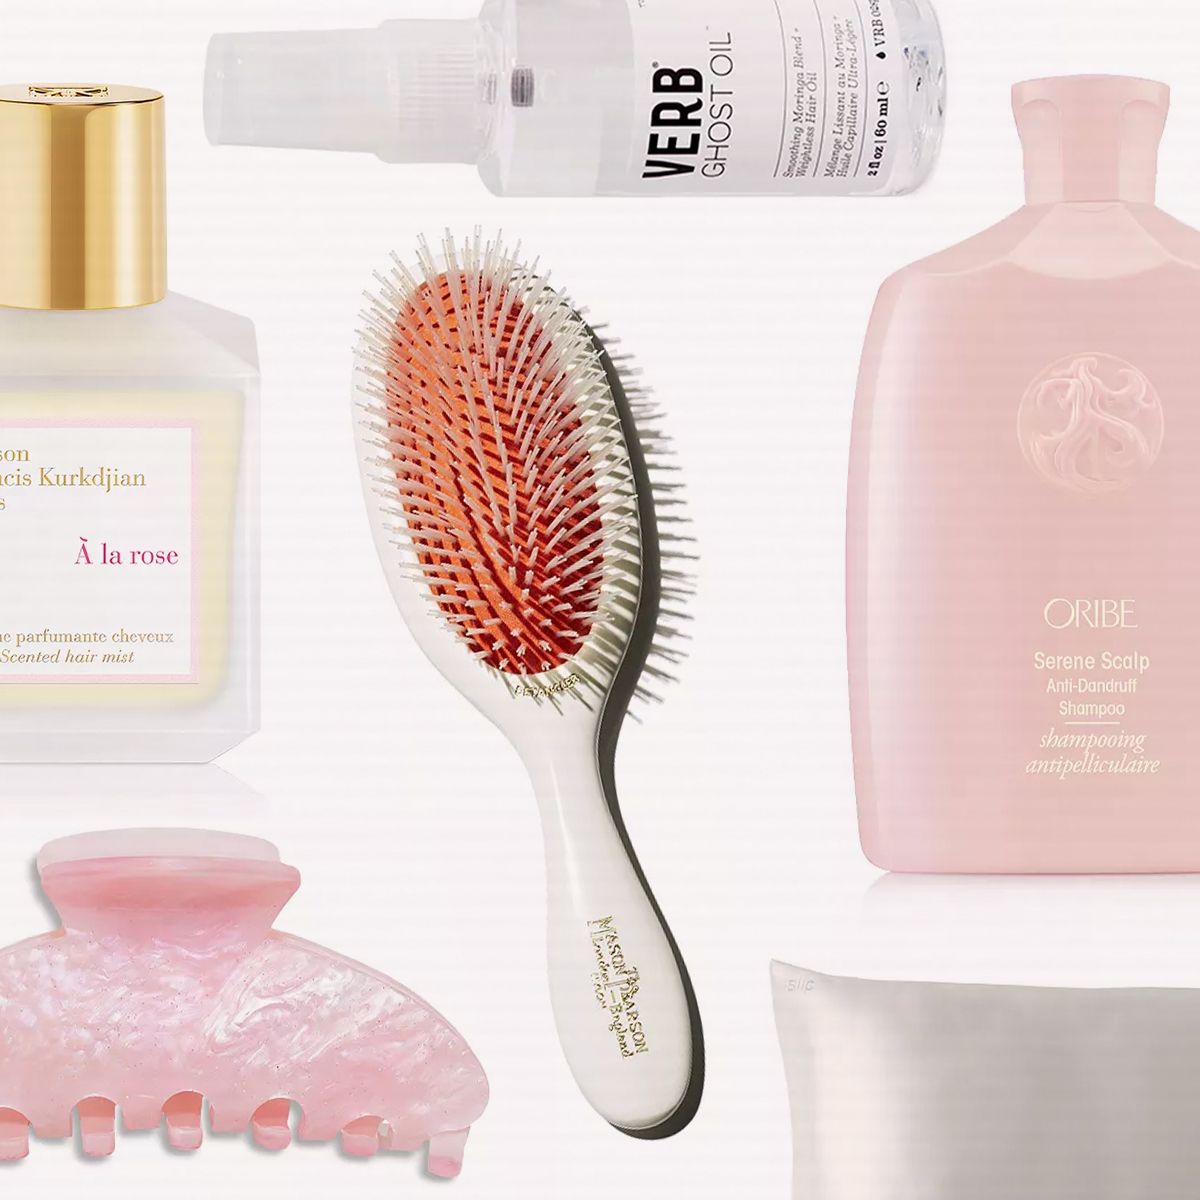  The Haircare Products You Should Invest In Based on Your Hair Goals 